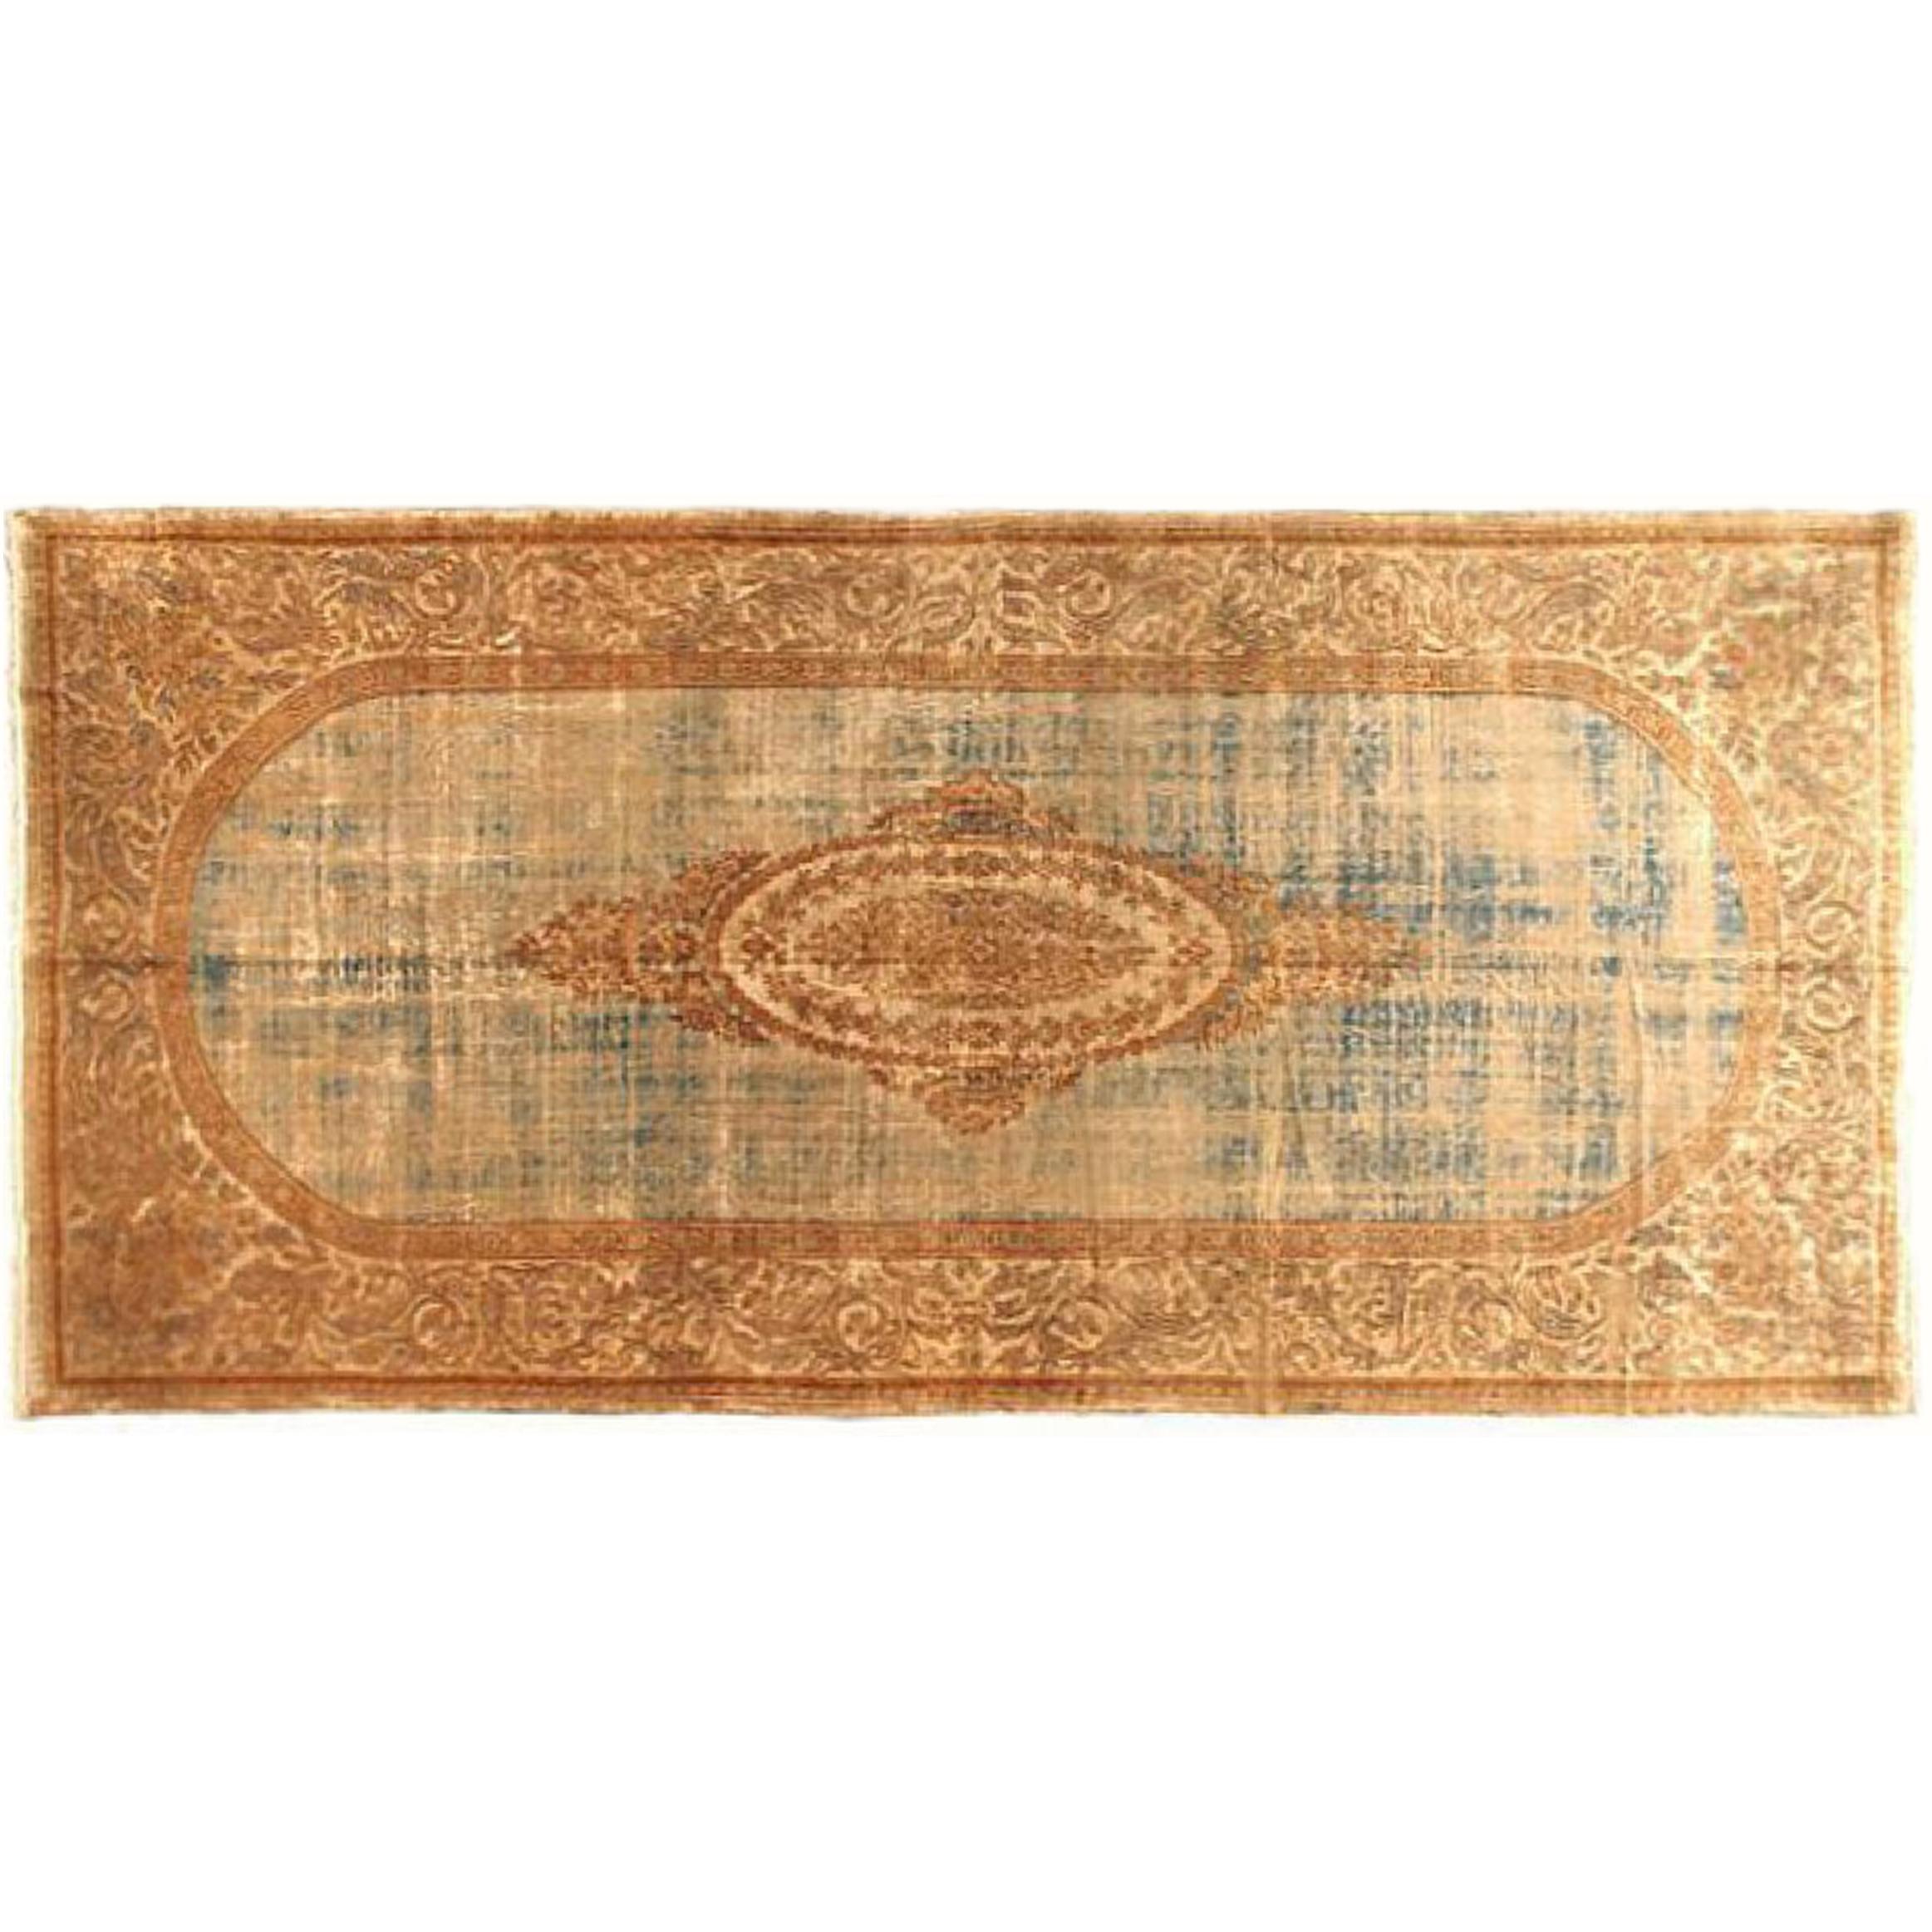 Antique Savonnerie Style Persian Kerman Oriental Rug, Distressed, w/ Soft Colors For Sale